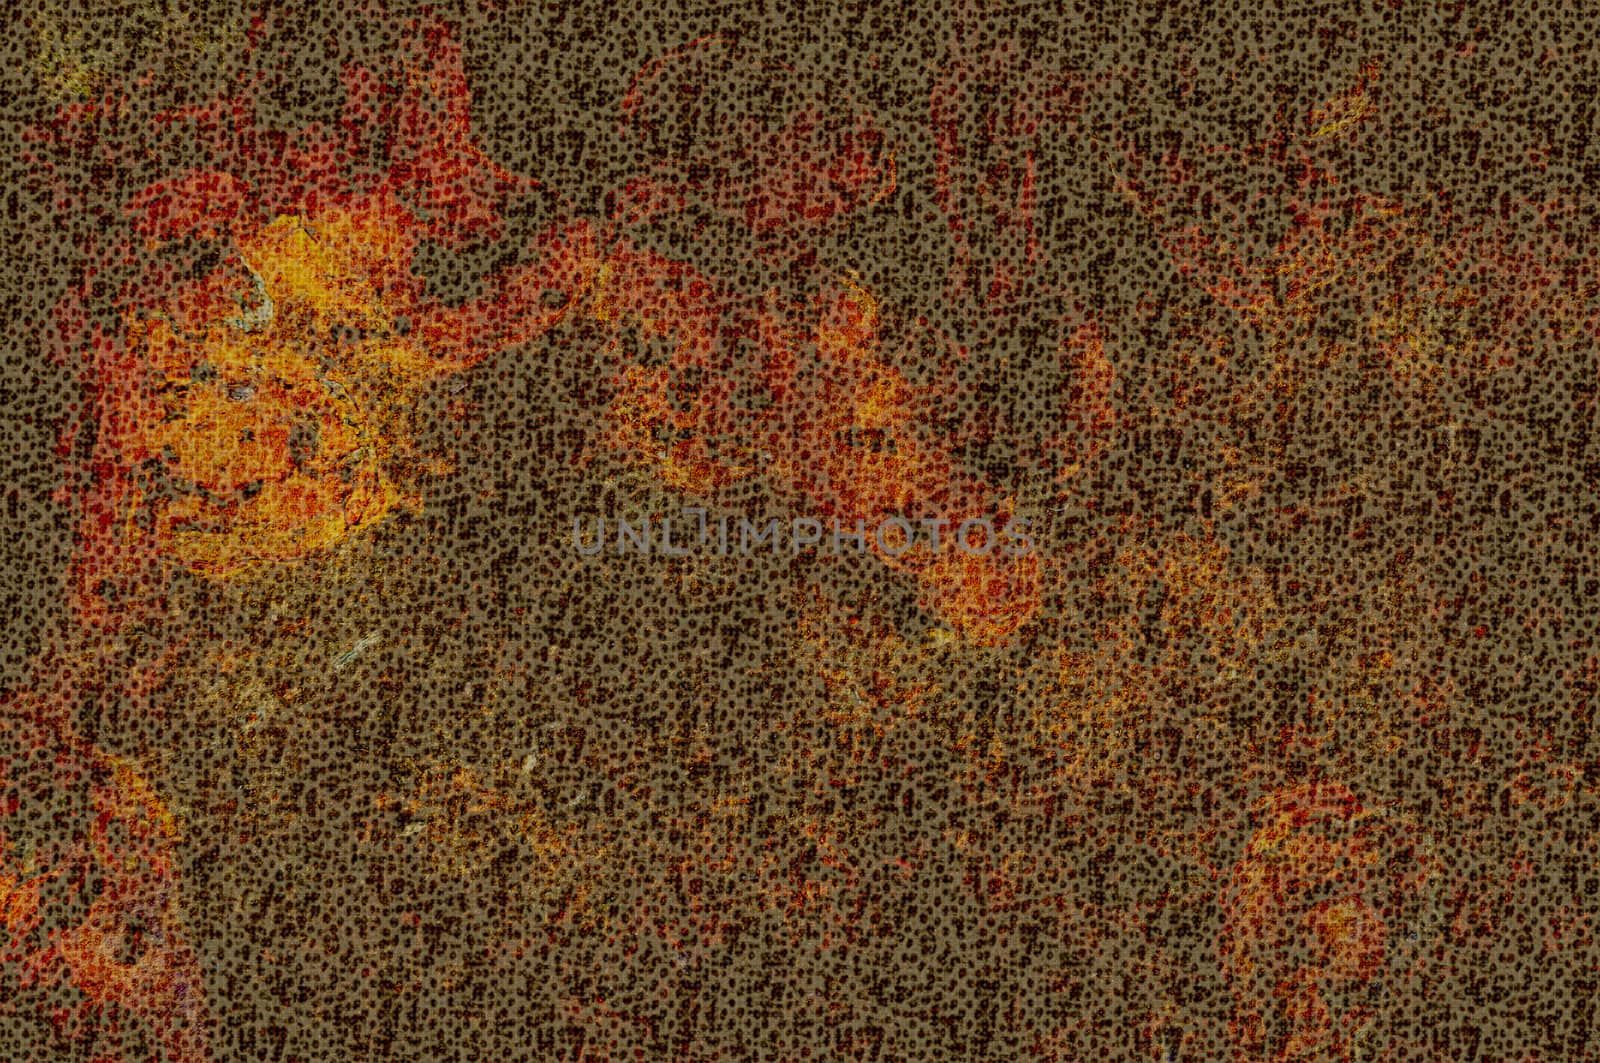 Abstract background with a red and orange texture of rust metal